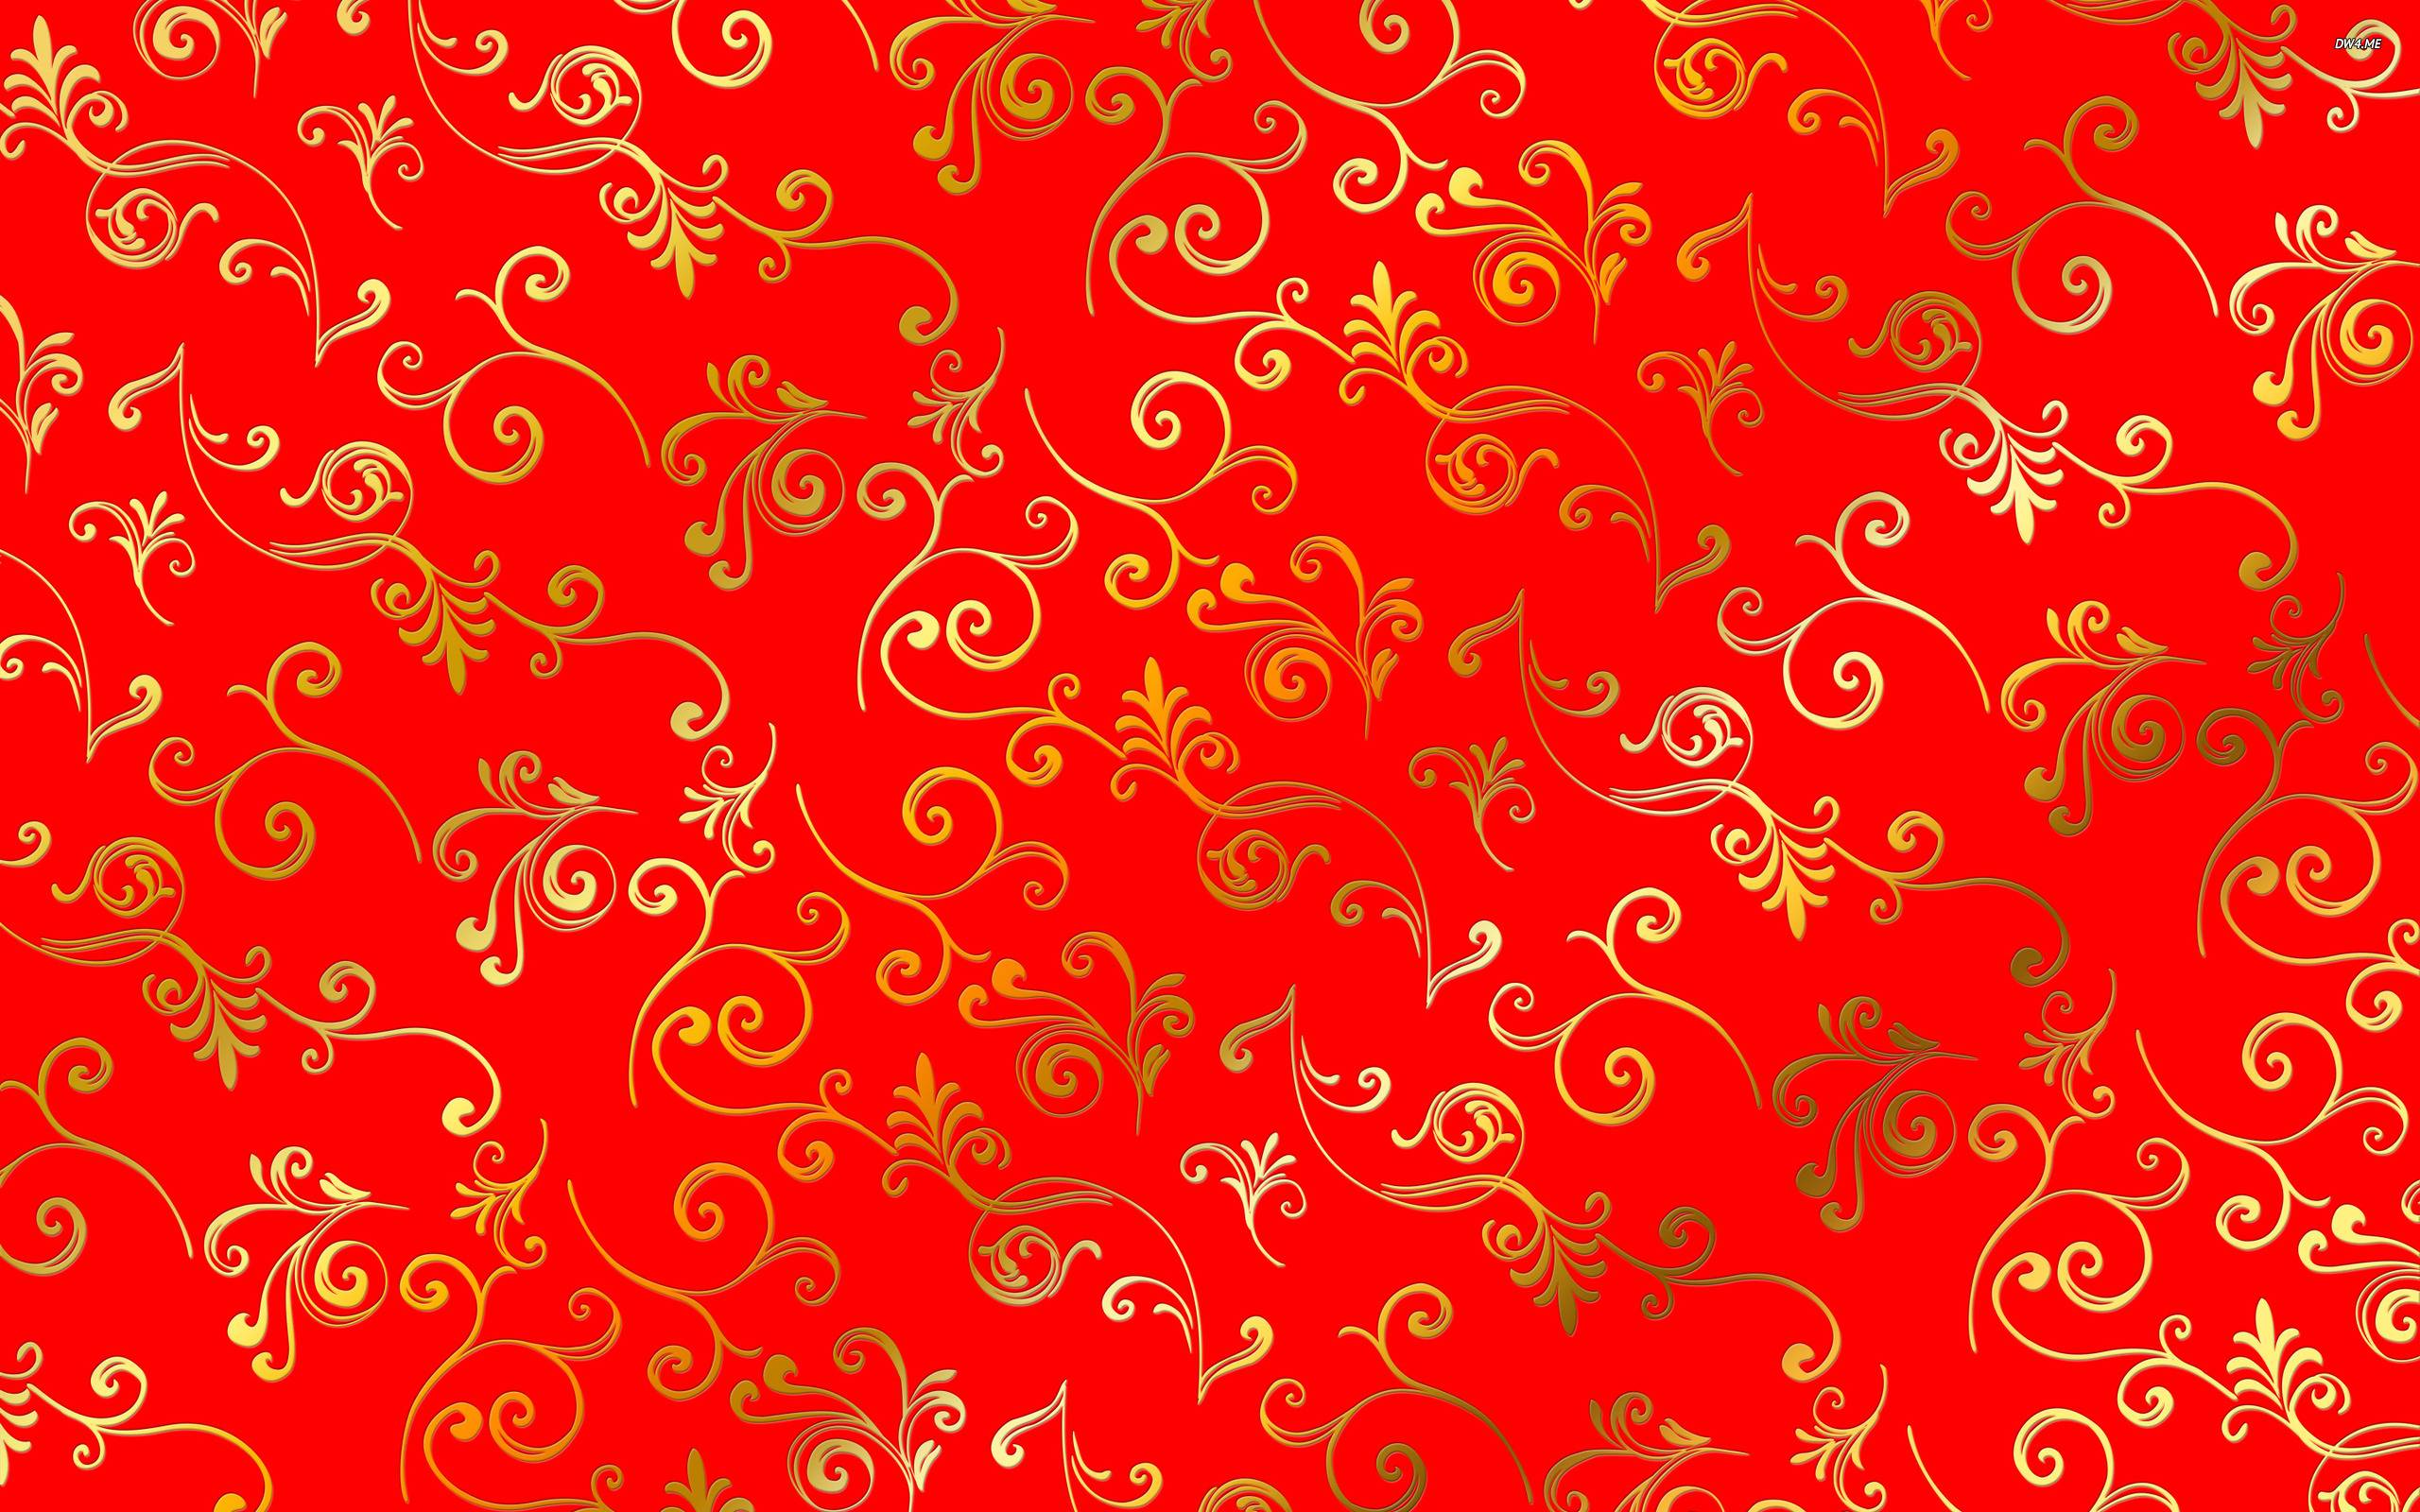 100+] Red And Gold Background s | Wallpapers.com